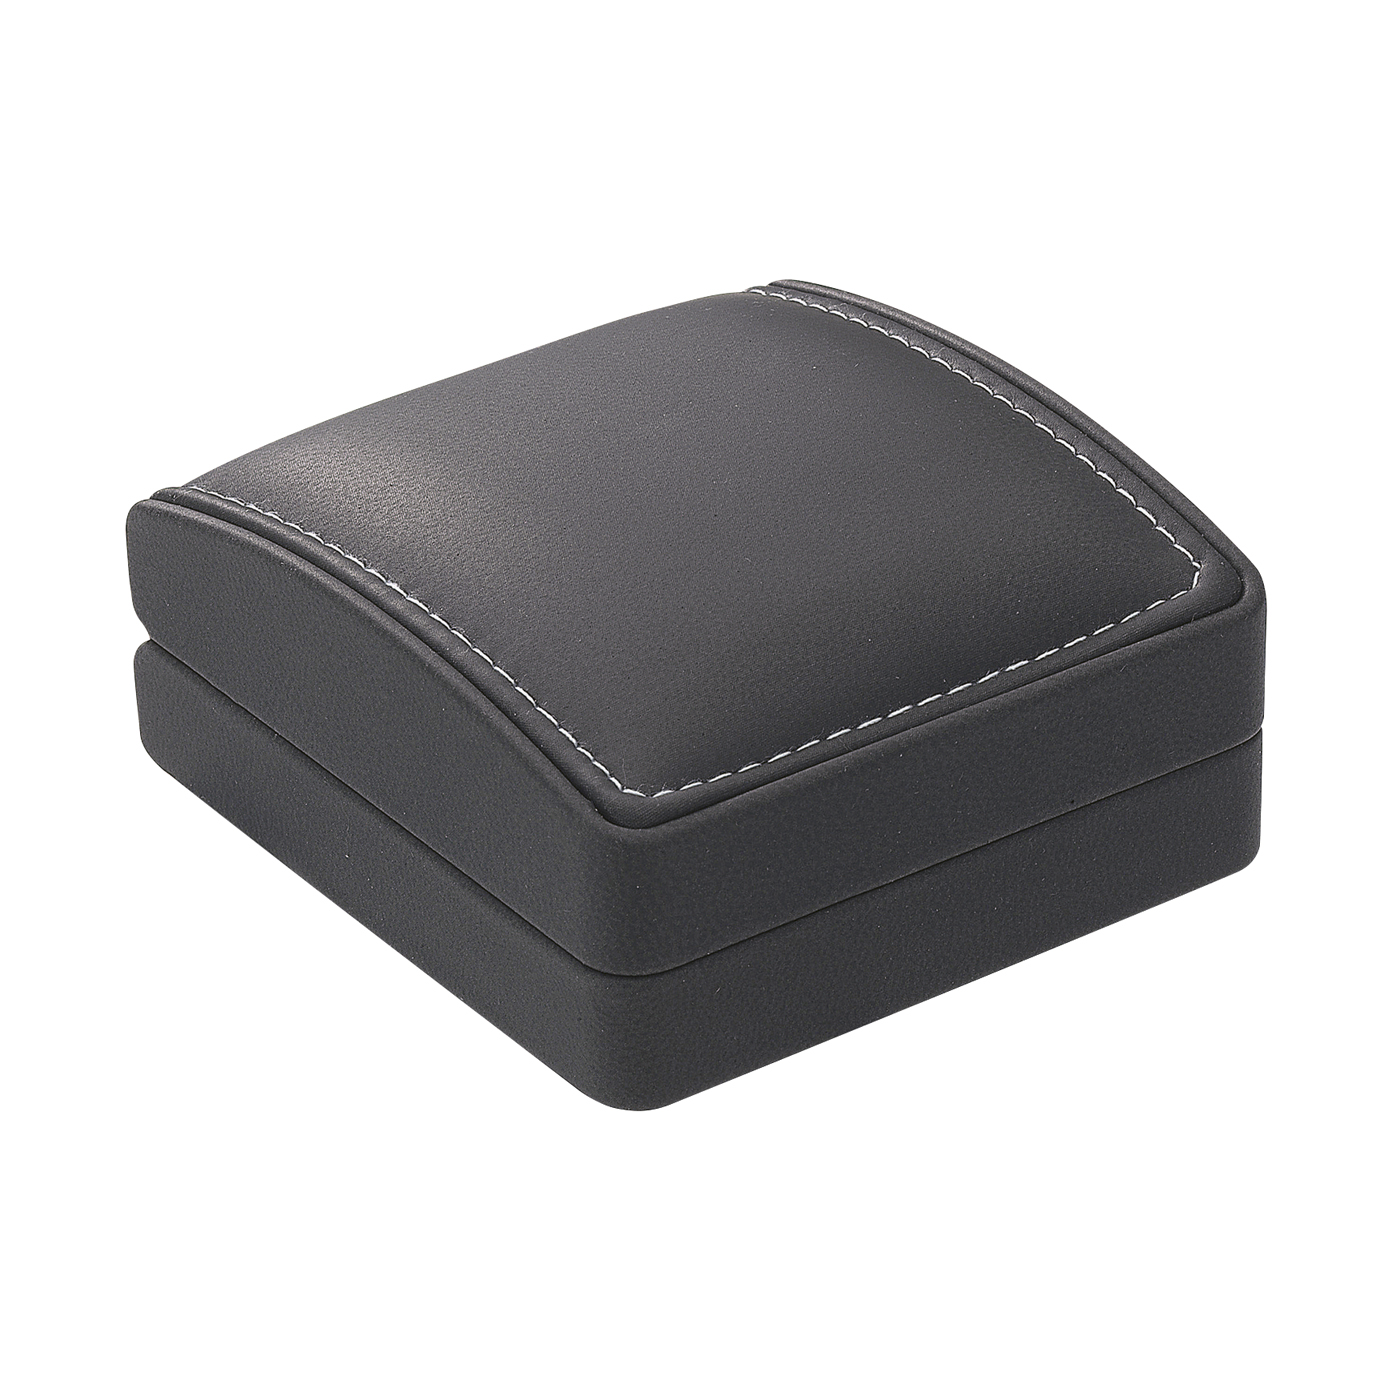 Jewellery Packaging "Soft Touch", Black, 80 x 80 x 26 mm - 1 piece